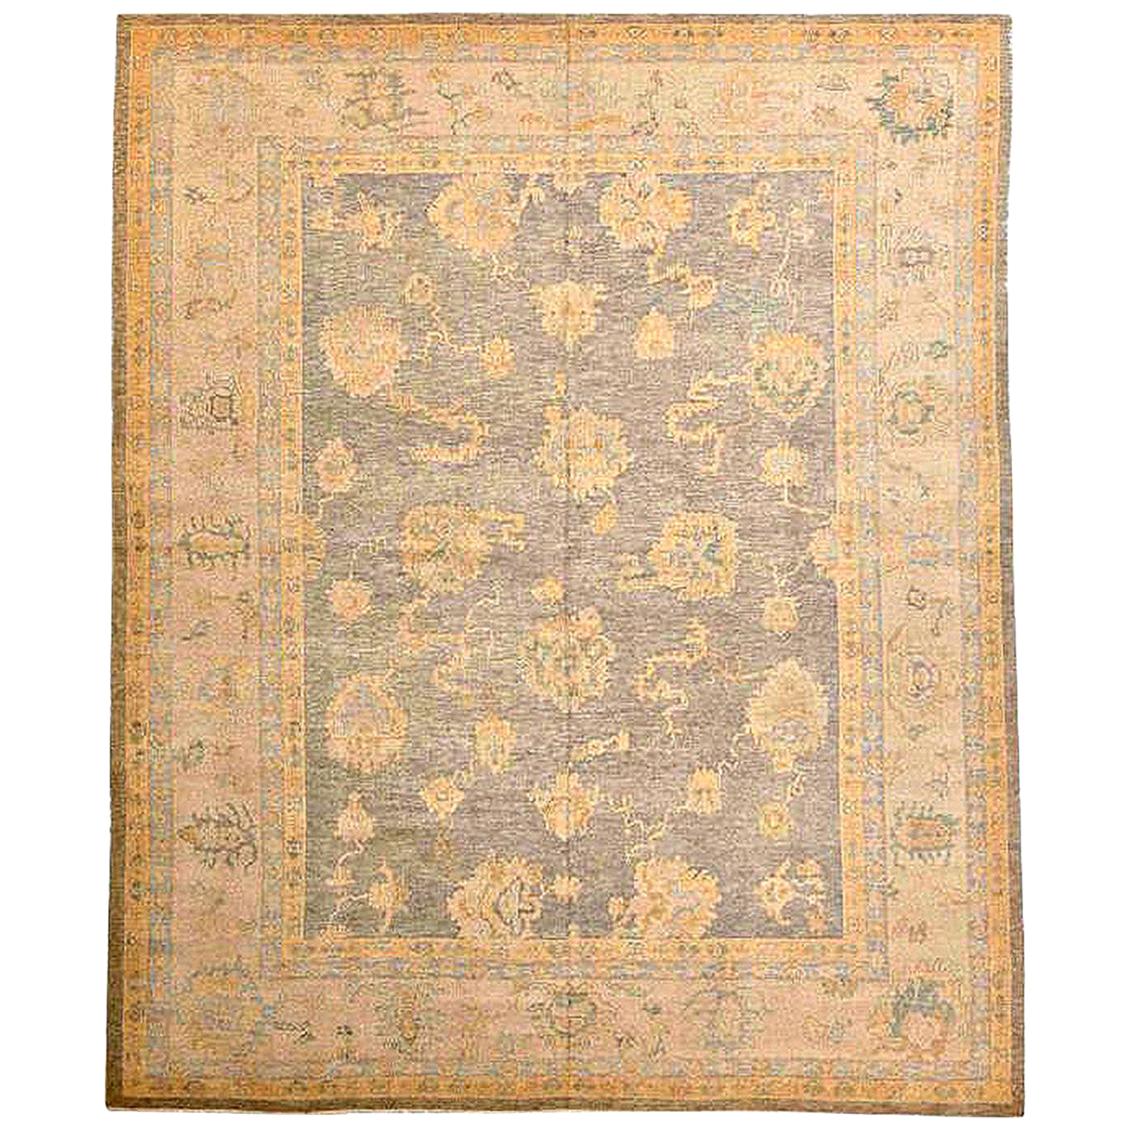 Contemporary Turkish Oushak Rug with Gray and Pink Floral Details